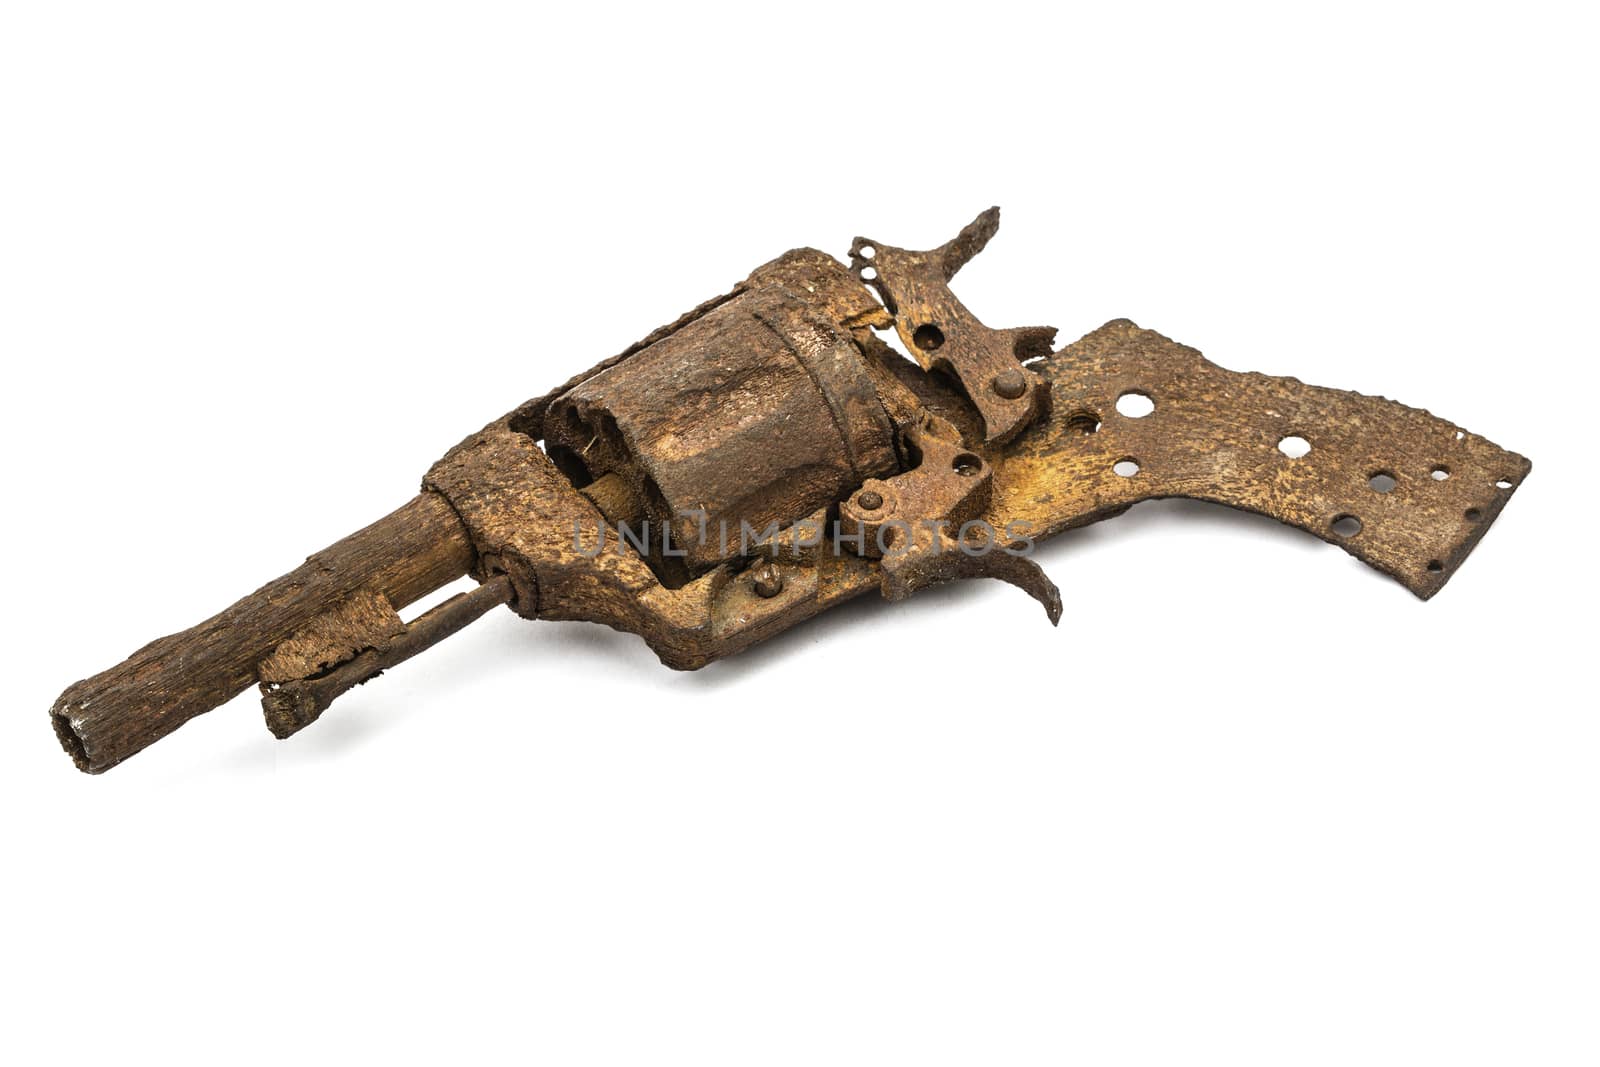 Old rusty pistol, Isolated on white background